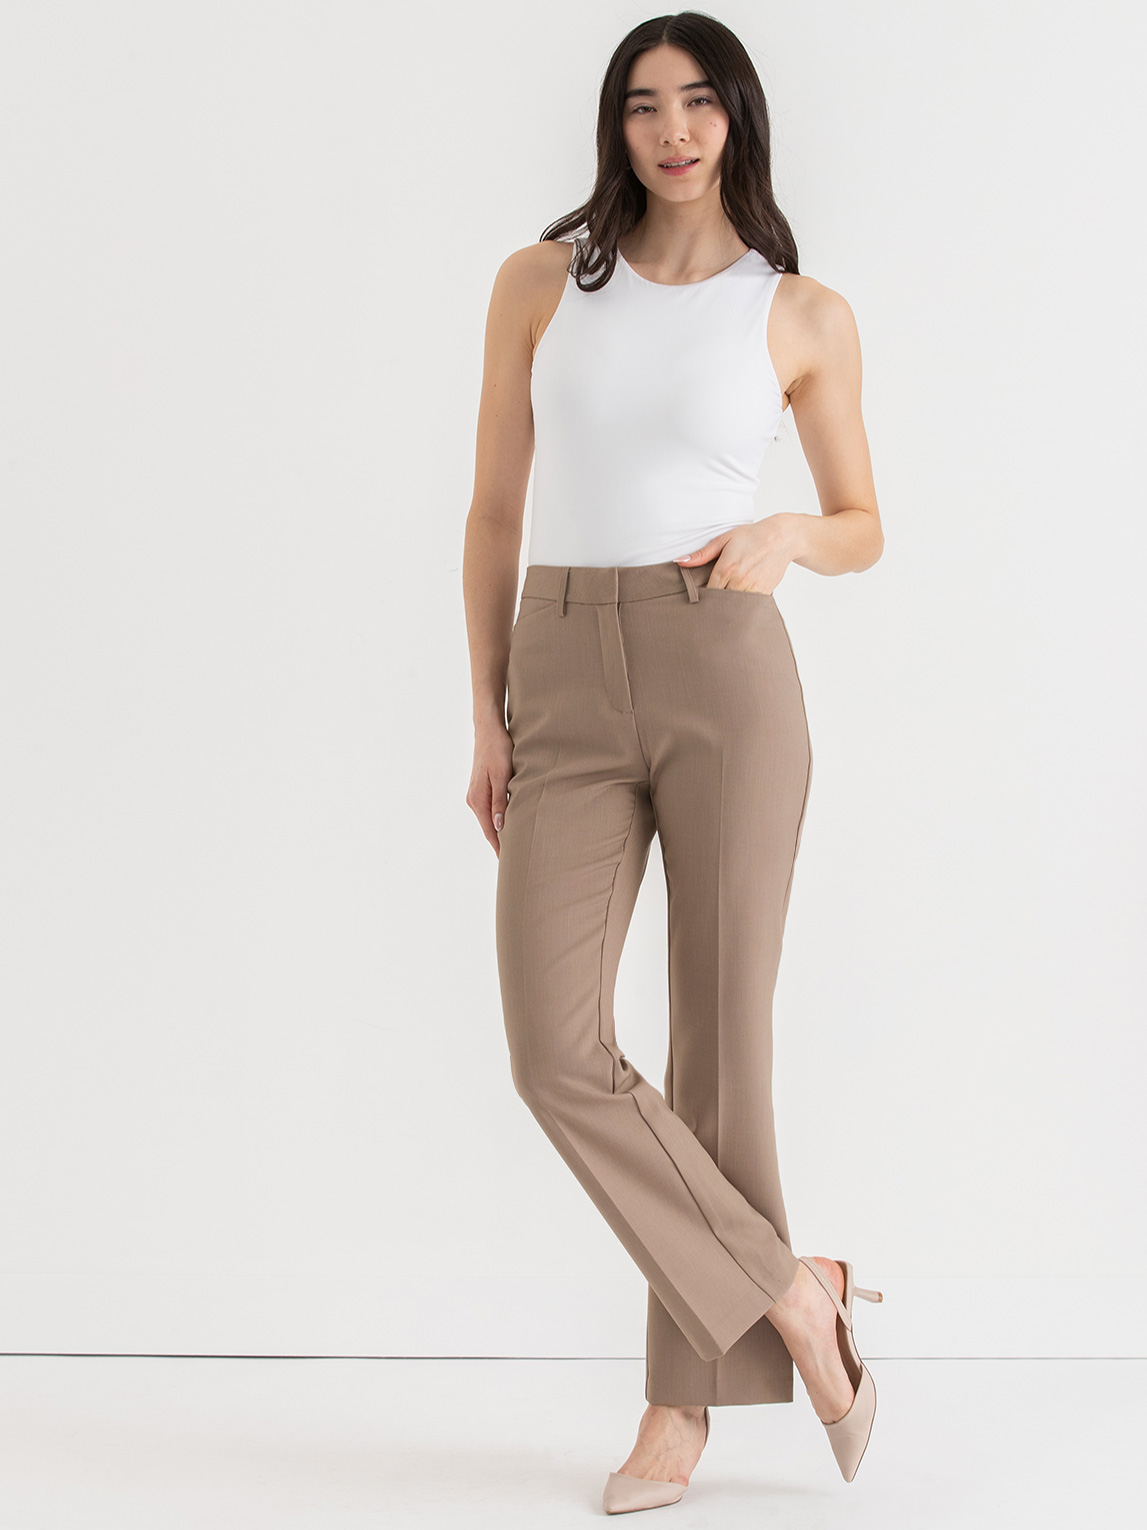 Bradley Bootcut Pant in Luxe Tailored